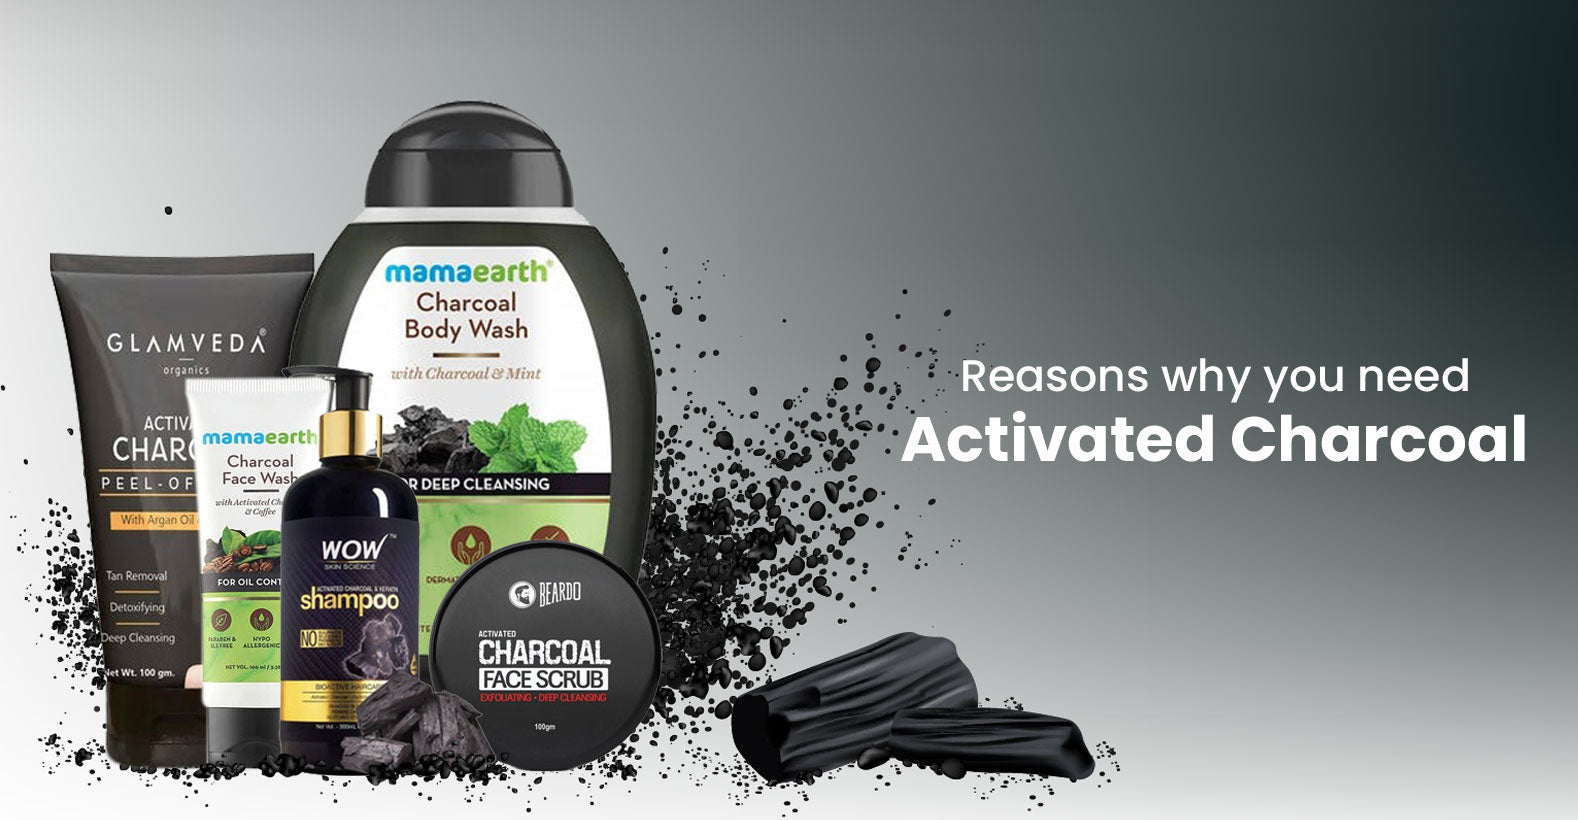 Benefits of Activated Charcoal for Face, Body and Hair